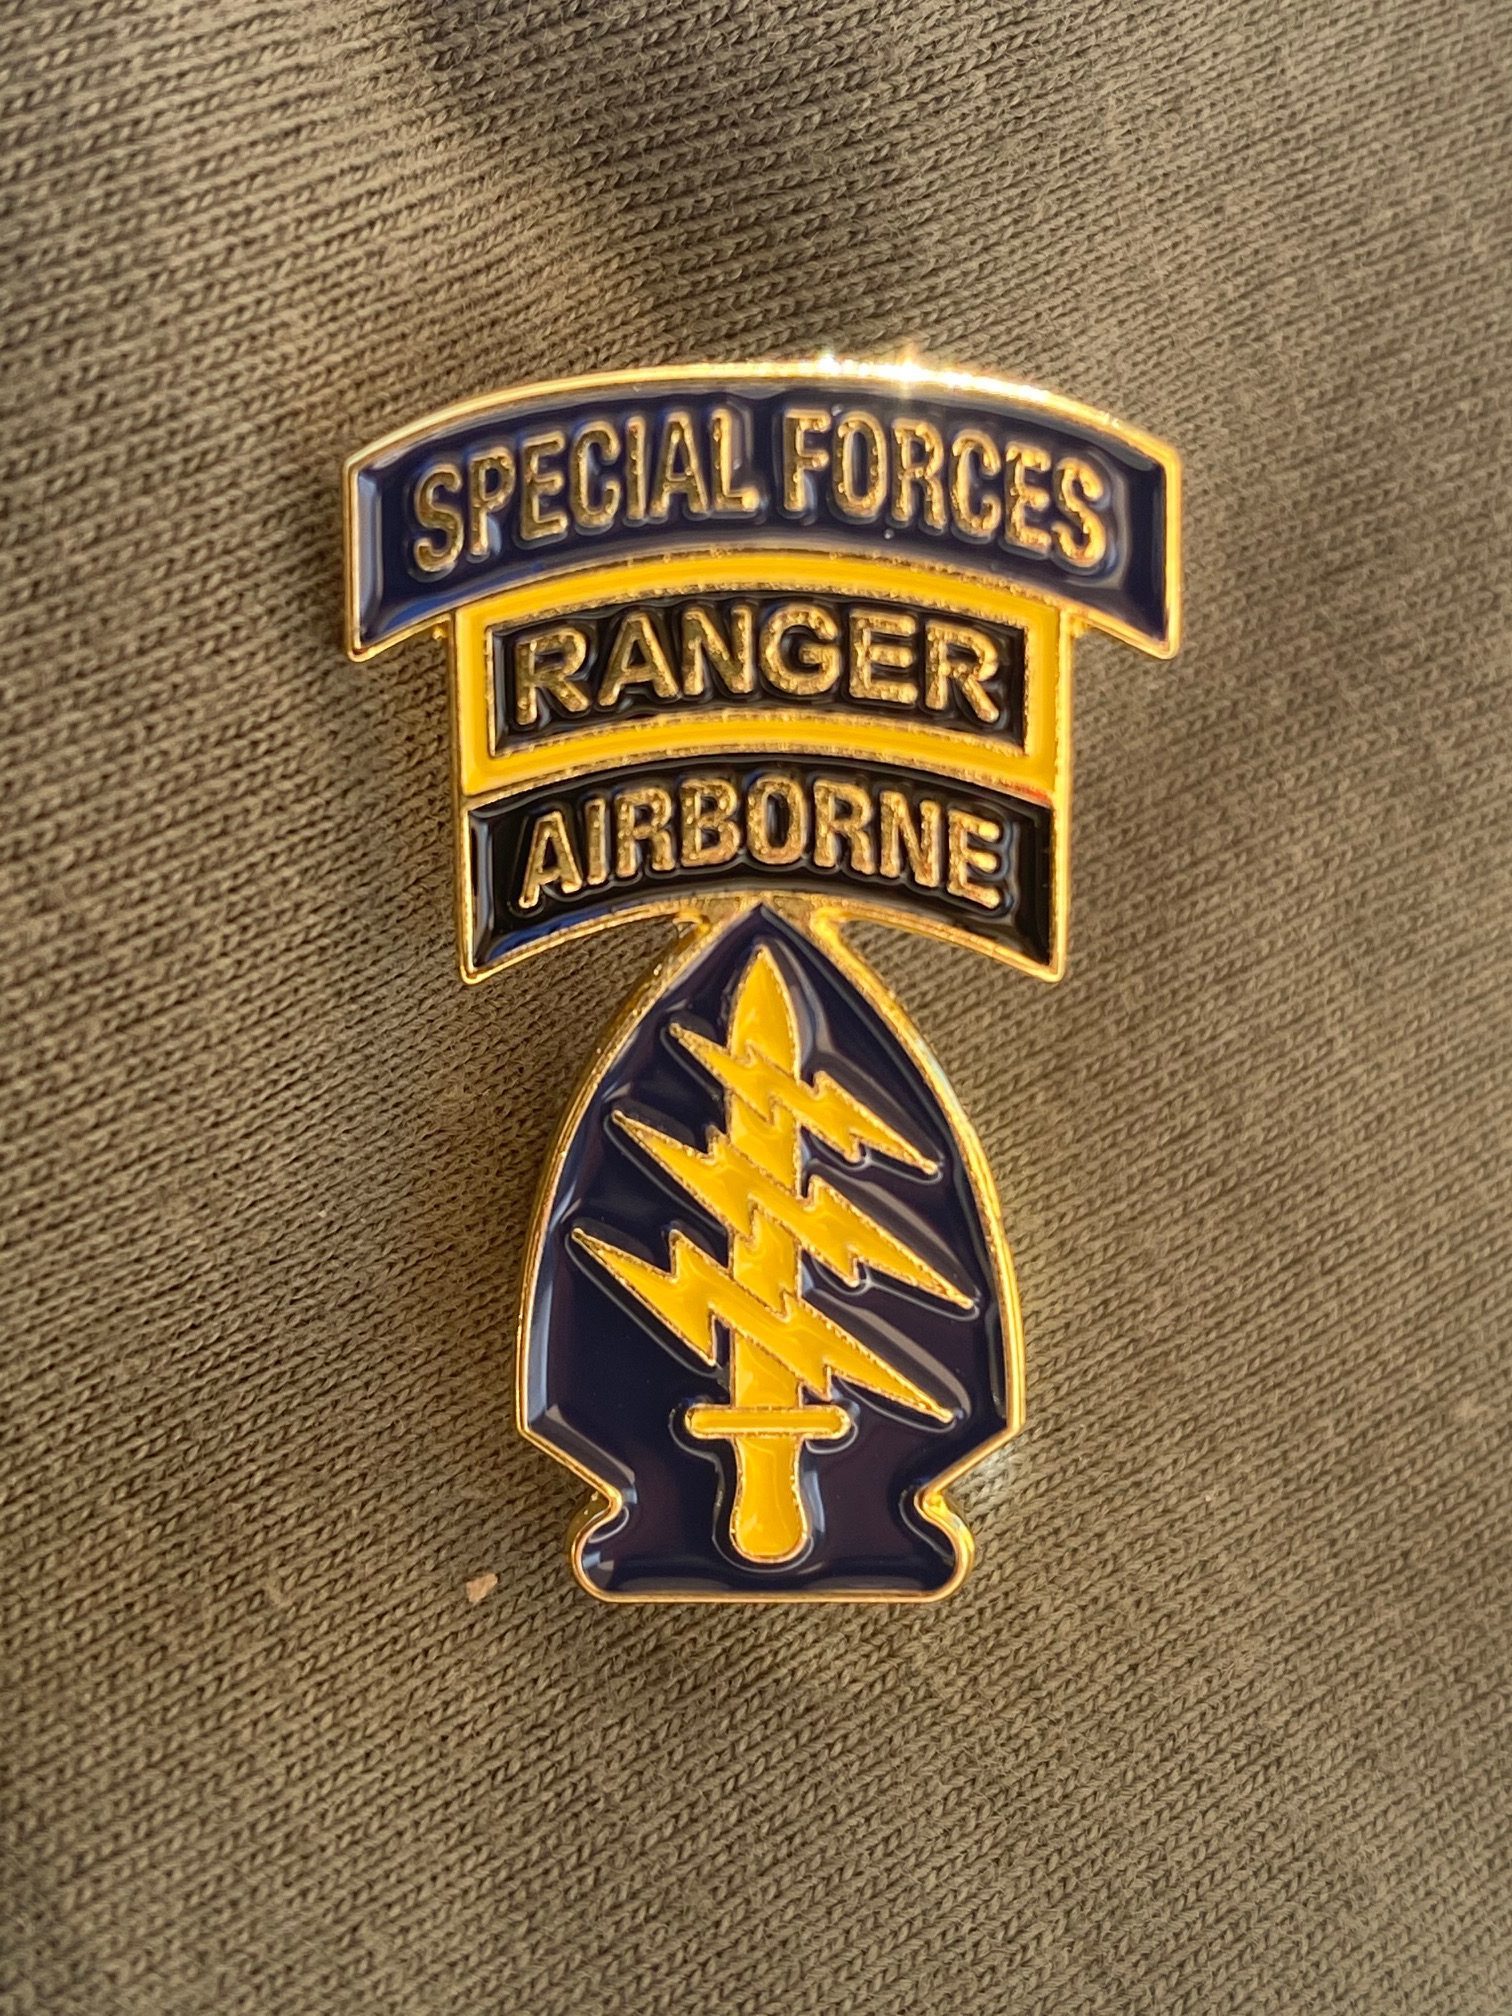 special forces ranger tab